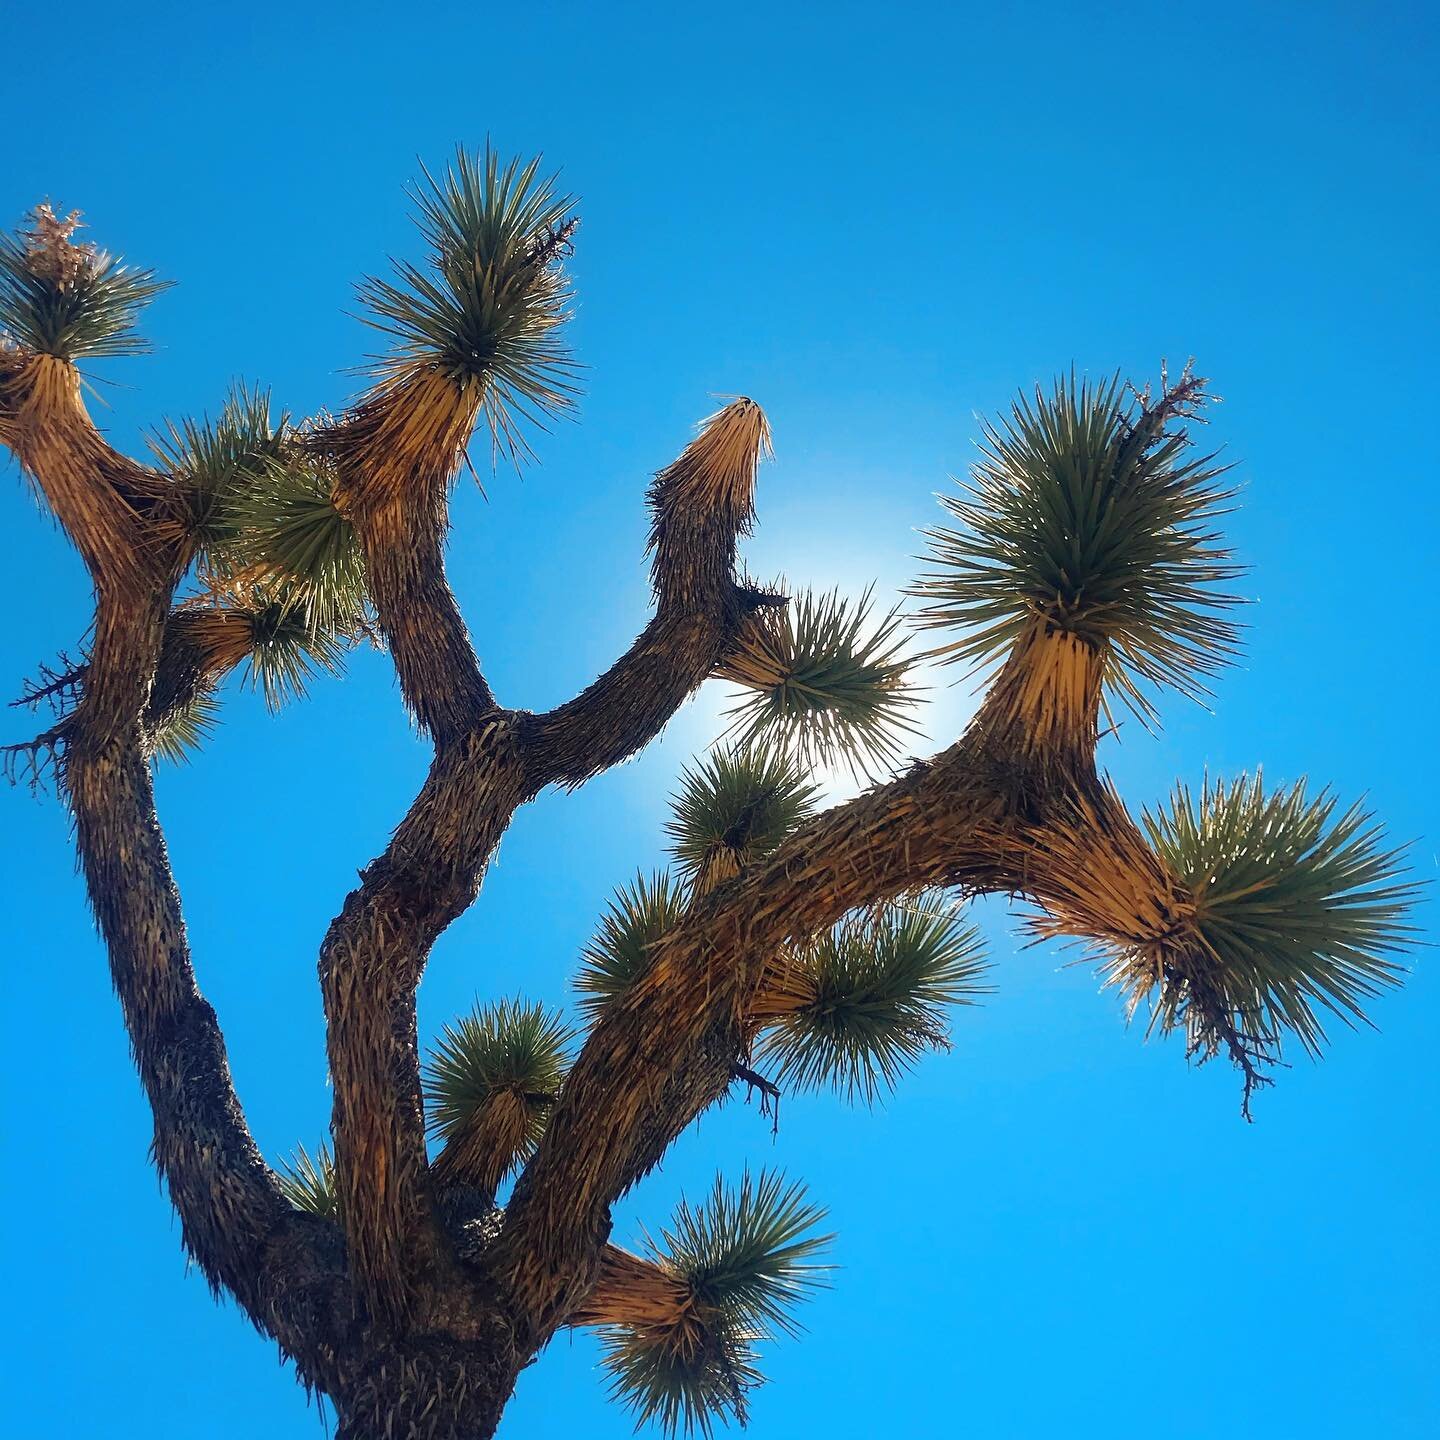 Why visit Joshua Tree in the winter
.
.
.
.
🥾Visiting Joshua Tree in the winter can be a particularly rewarding experience. With cooler temperatures, you'll be able to take your time on extended hikes without having to worry as much about heat-relat